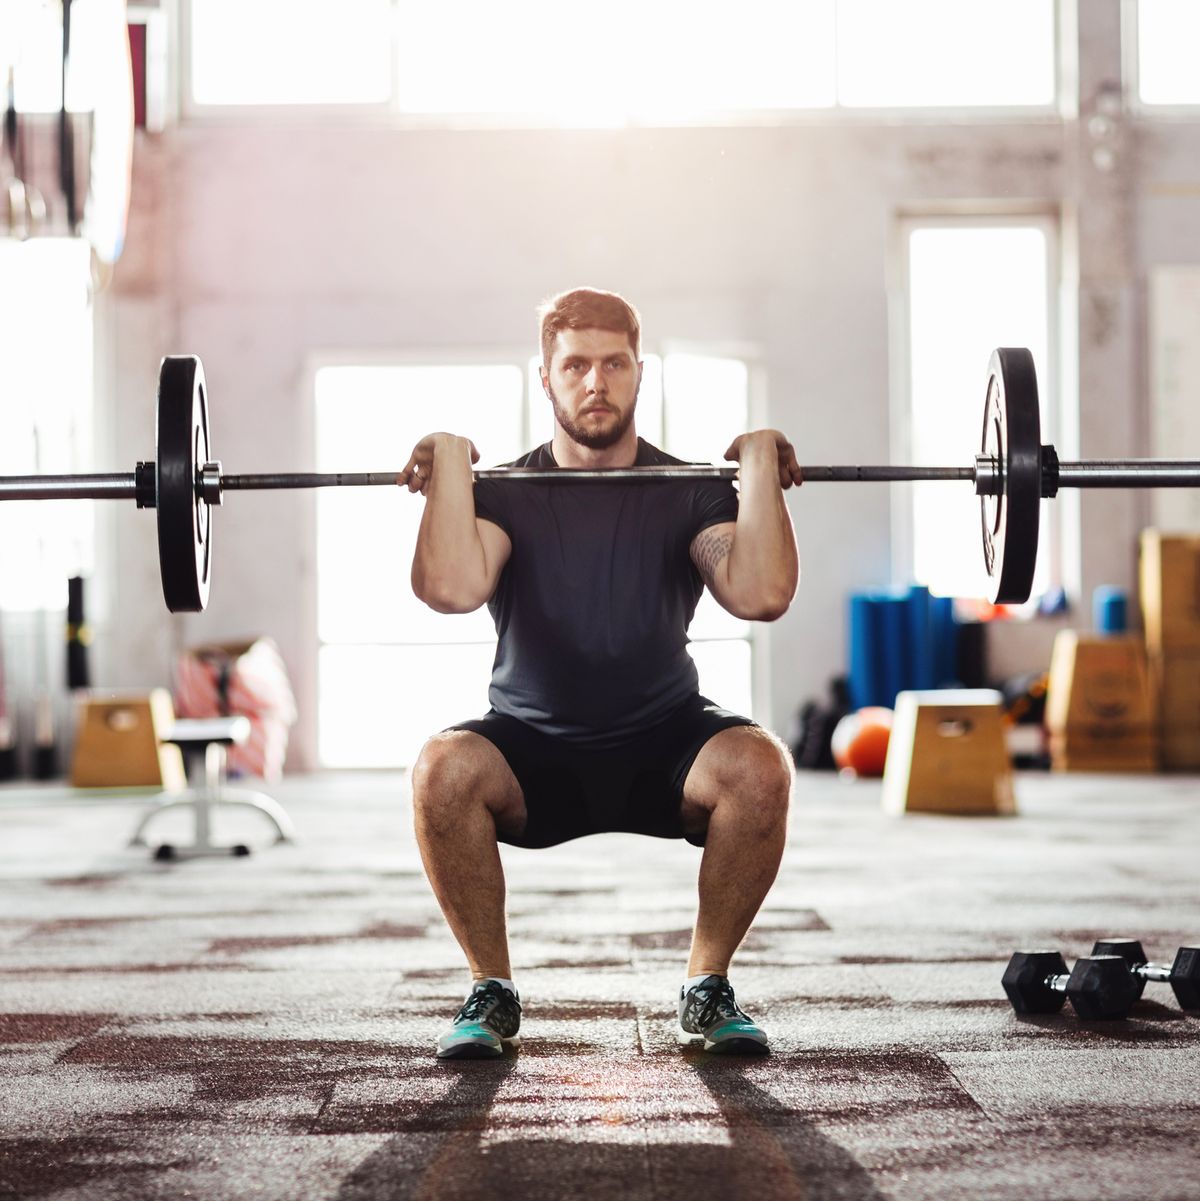 Healthy Fitness Man Working Out Legs With Dumbbells In A Gym - Front Squat  Exercise Stock Photo, Picture and Royalty Free Image. Image 92260585.